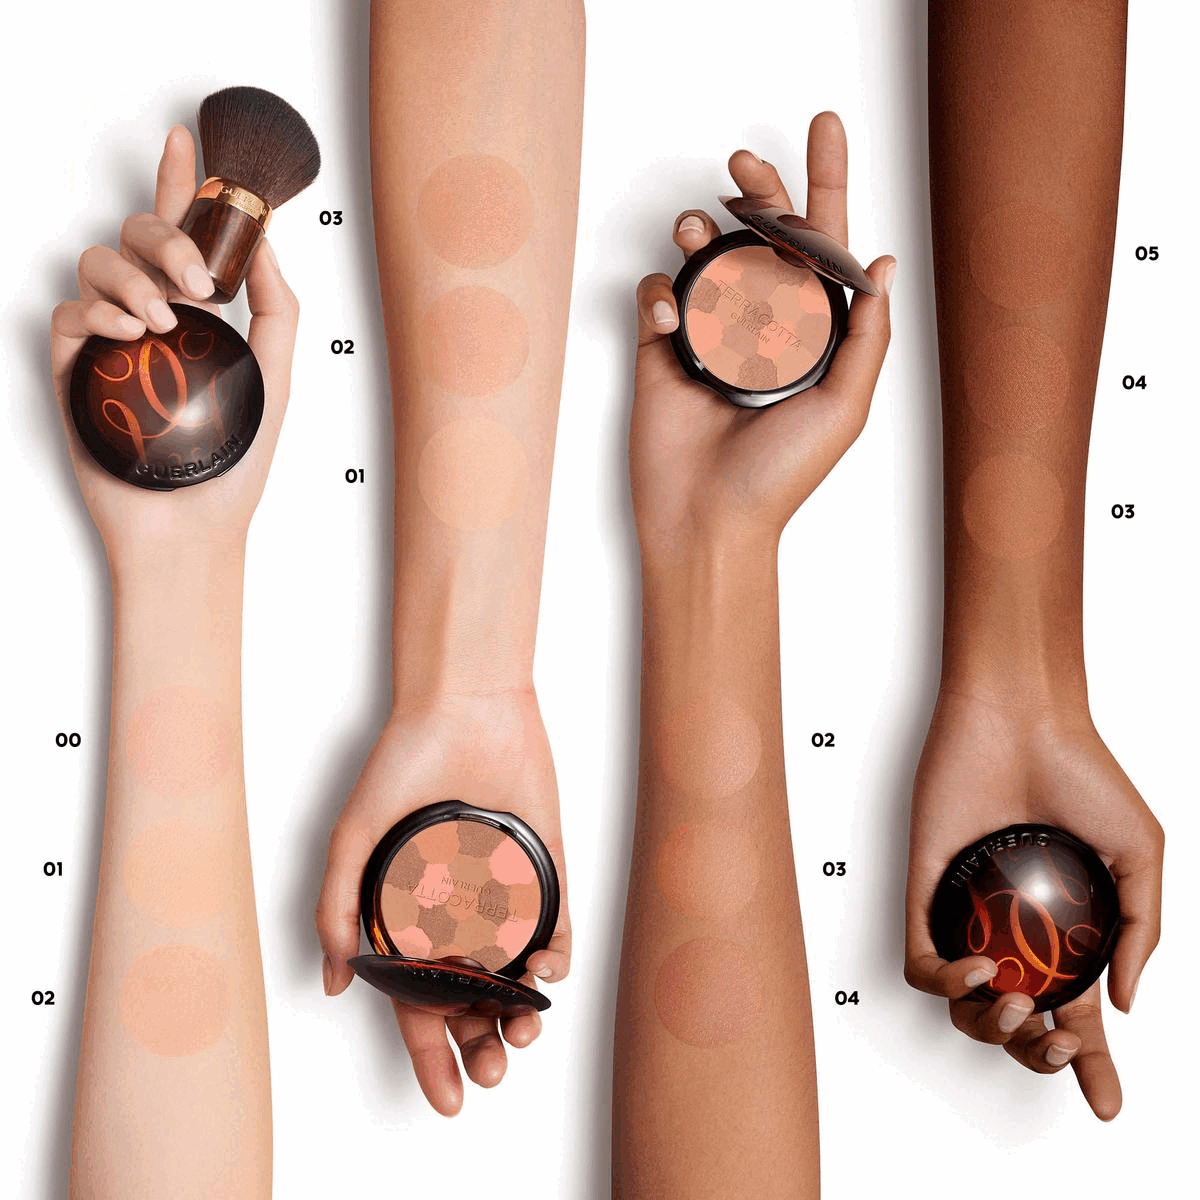 Image 1, swatch imagery. Image 2, 96% naturally derived ingredients